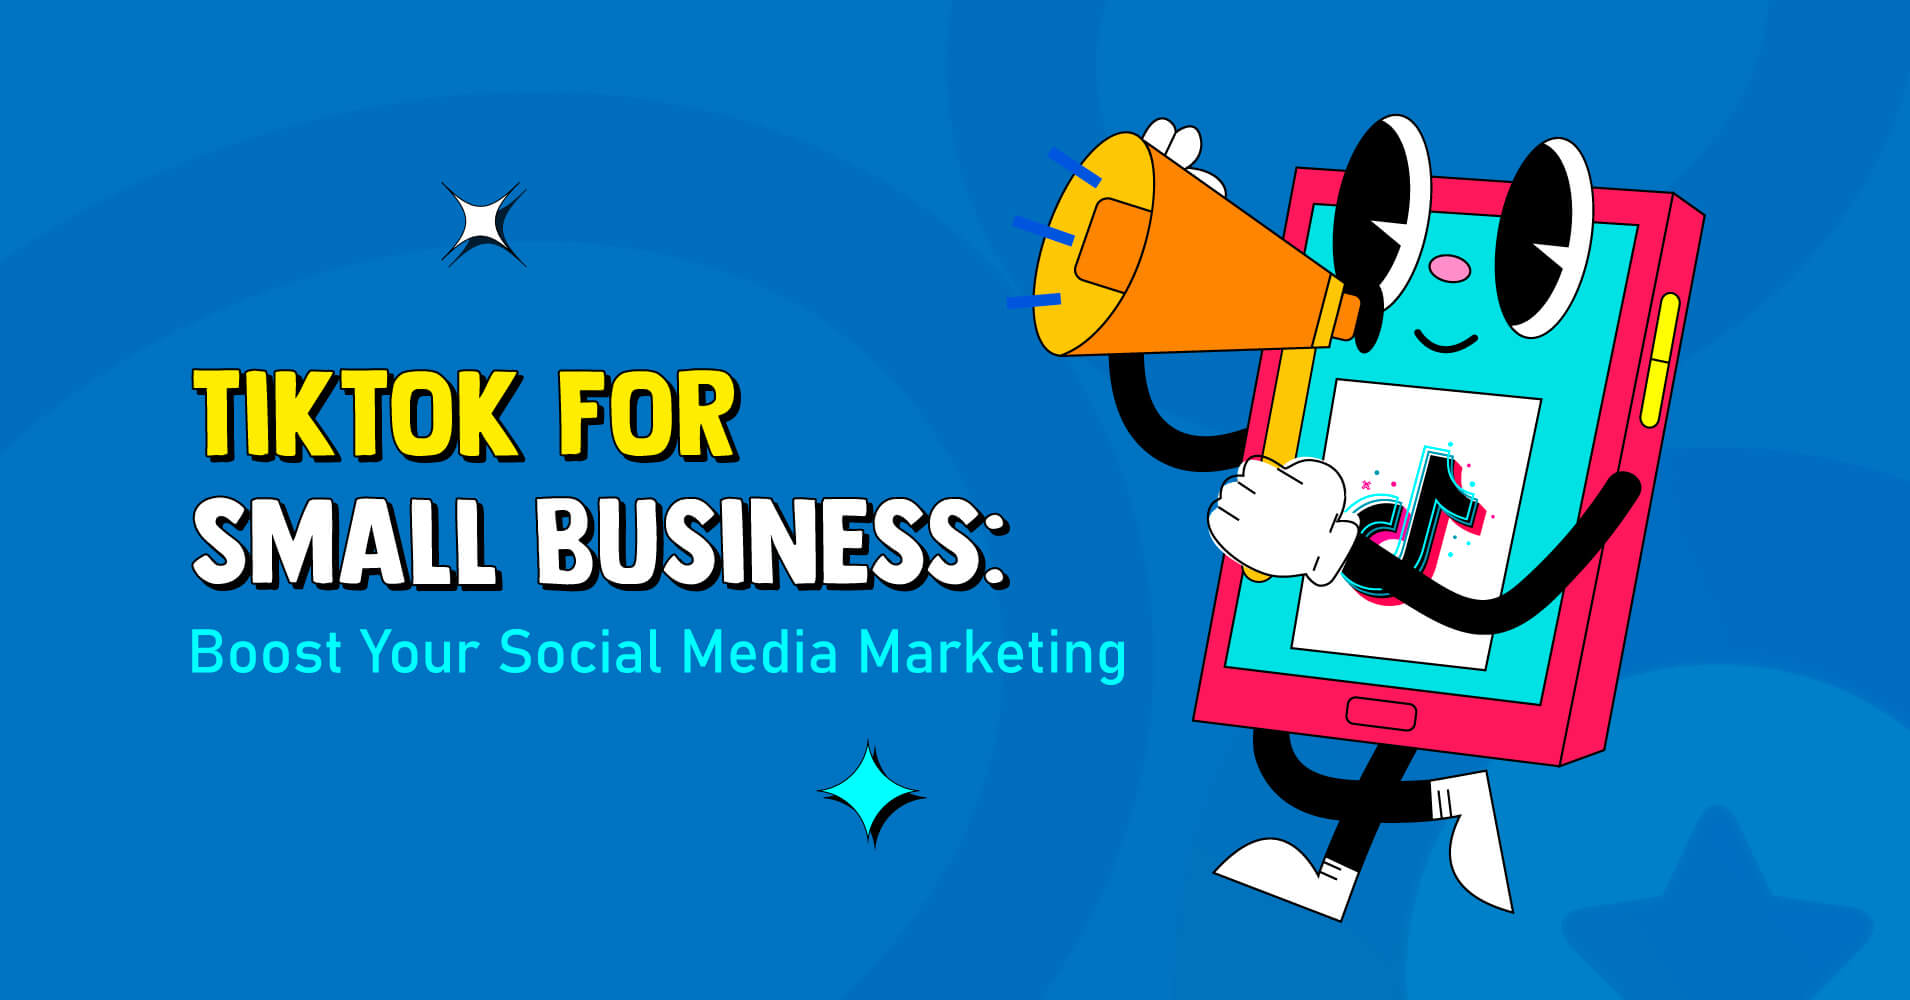 TikTok for small business to boost your social media marketing